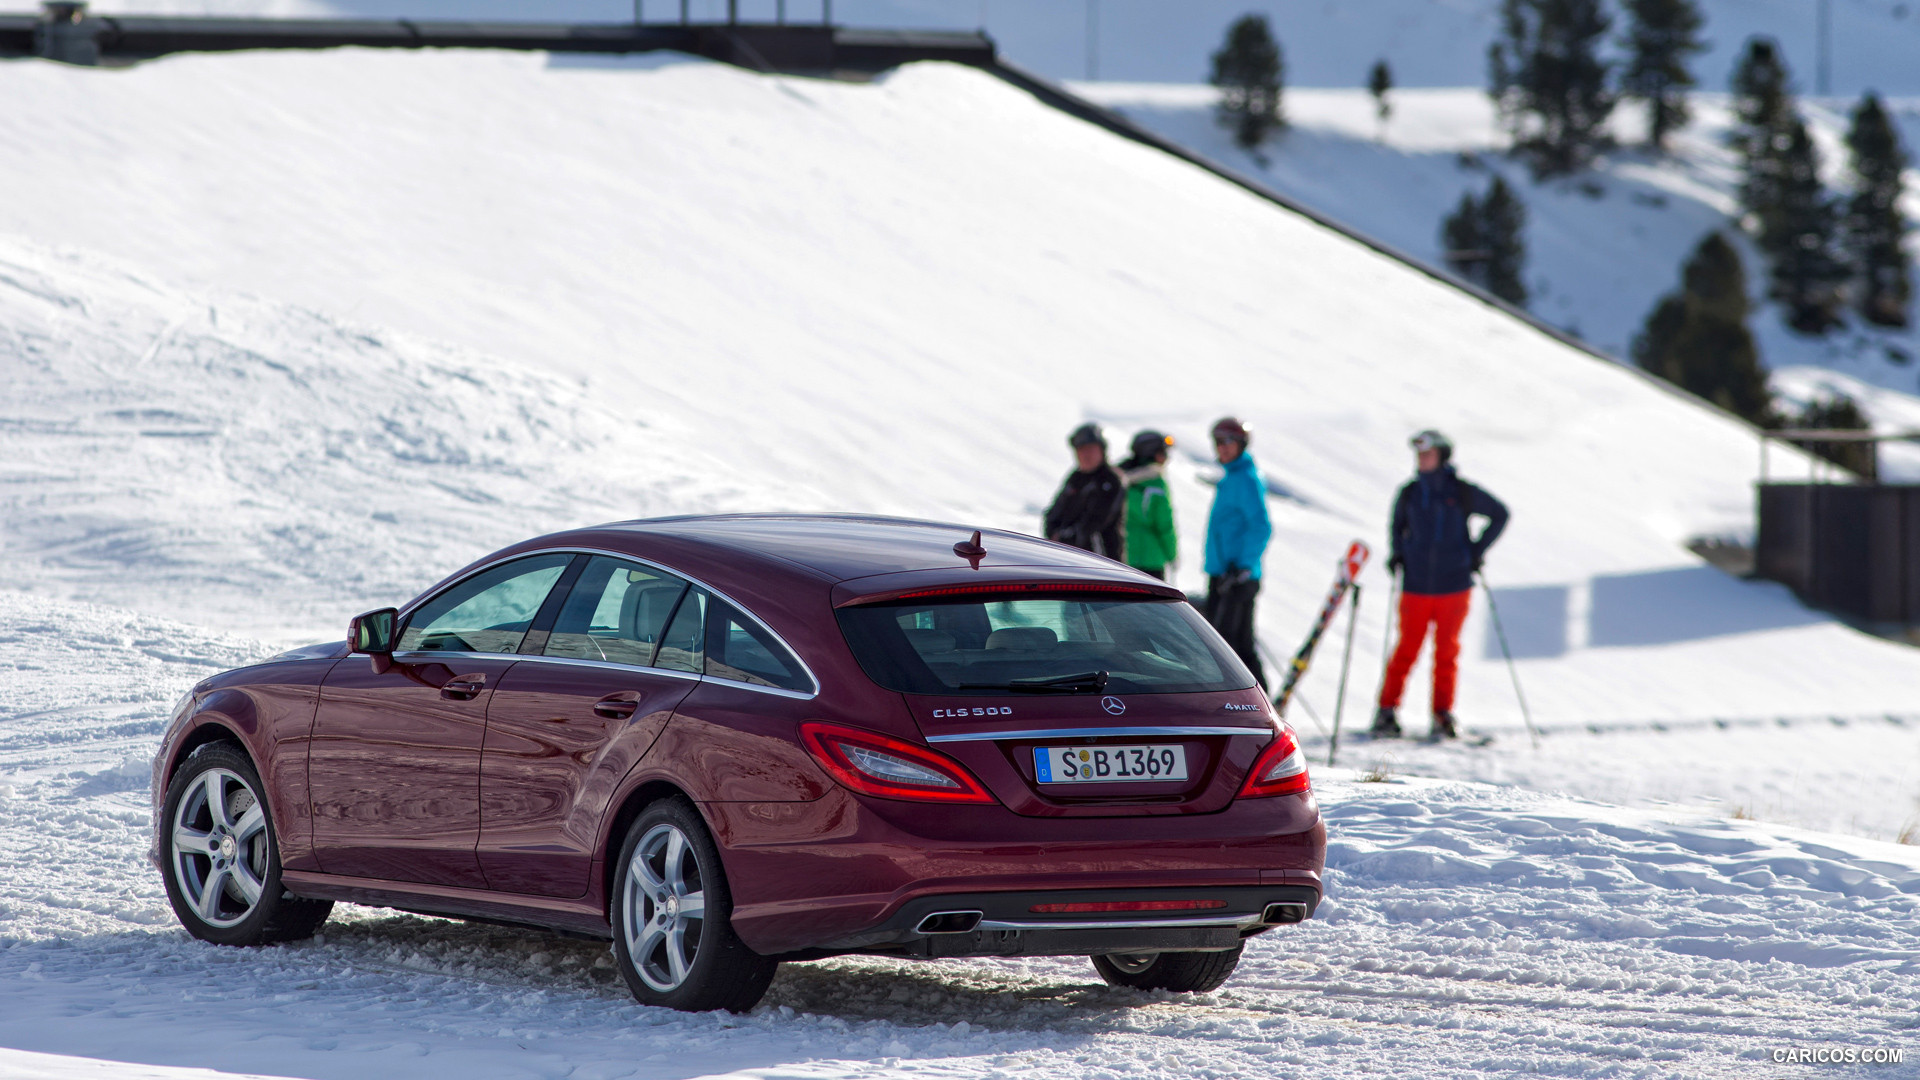 2013 Mercedes-Benz CLS 500 4MATIC Shooting Brake on Snow - Rear, #164 of 184